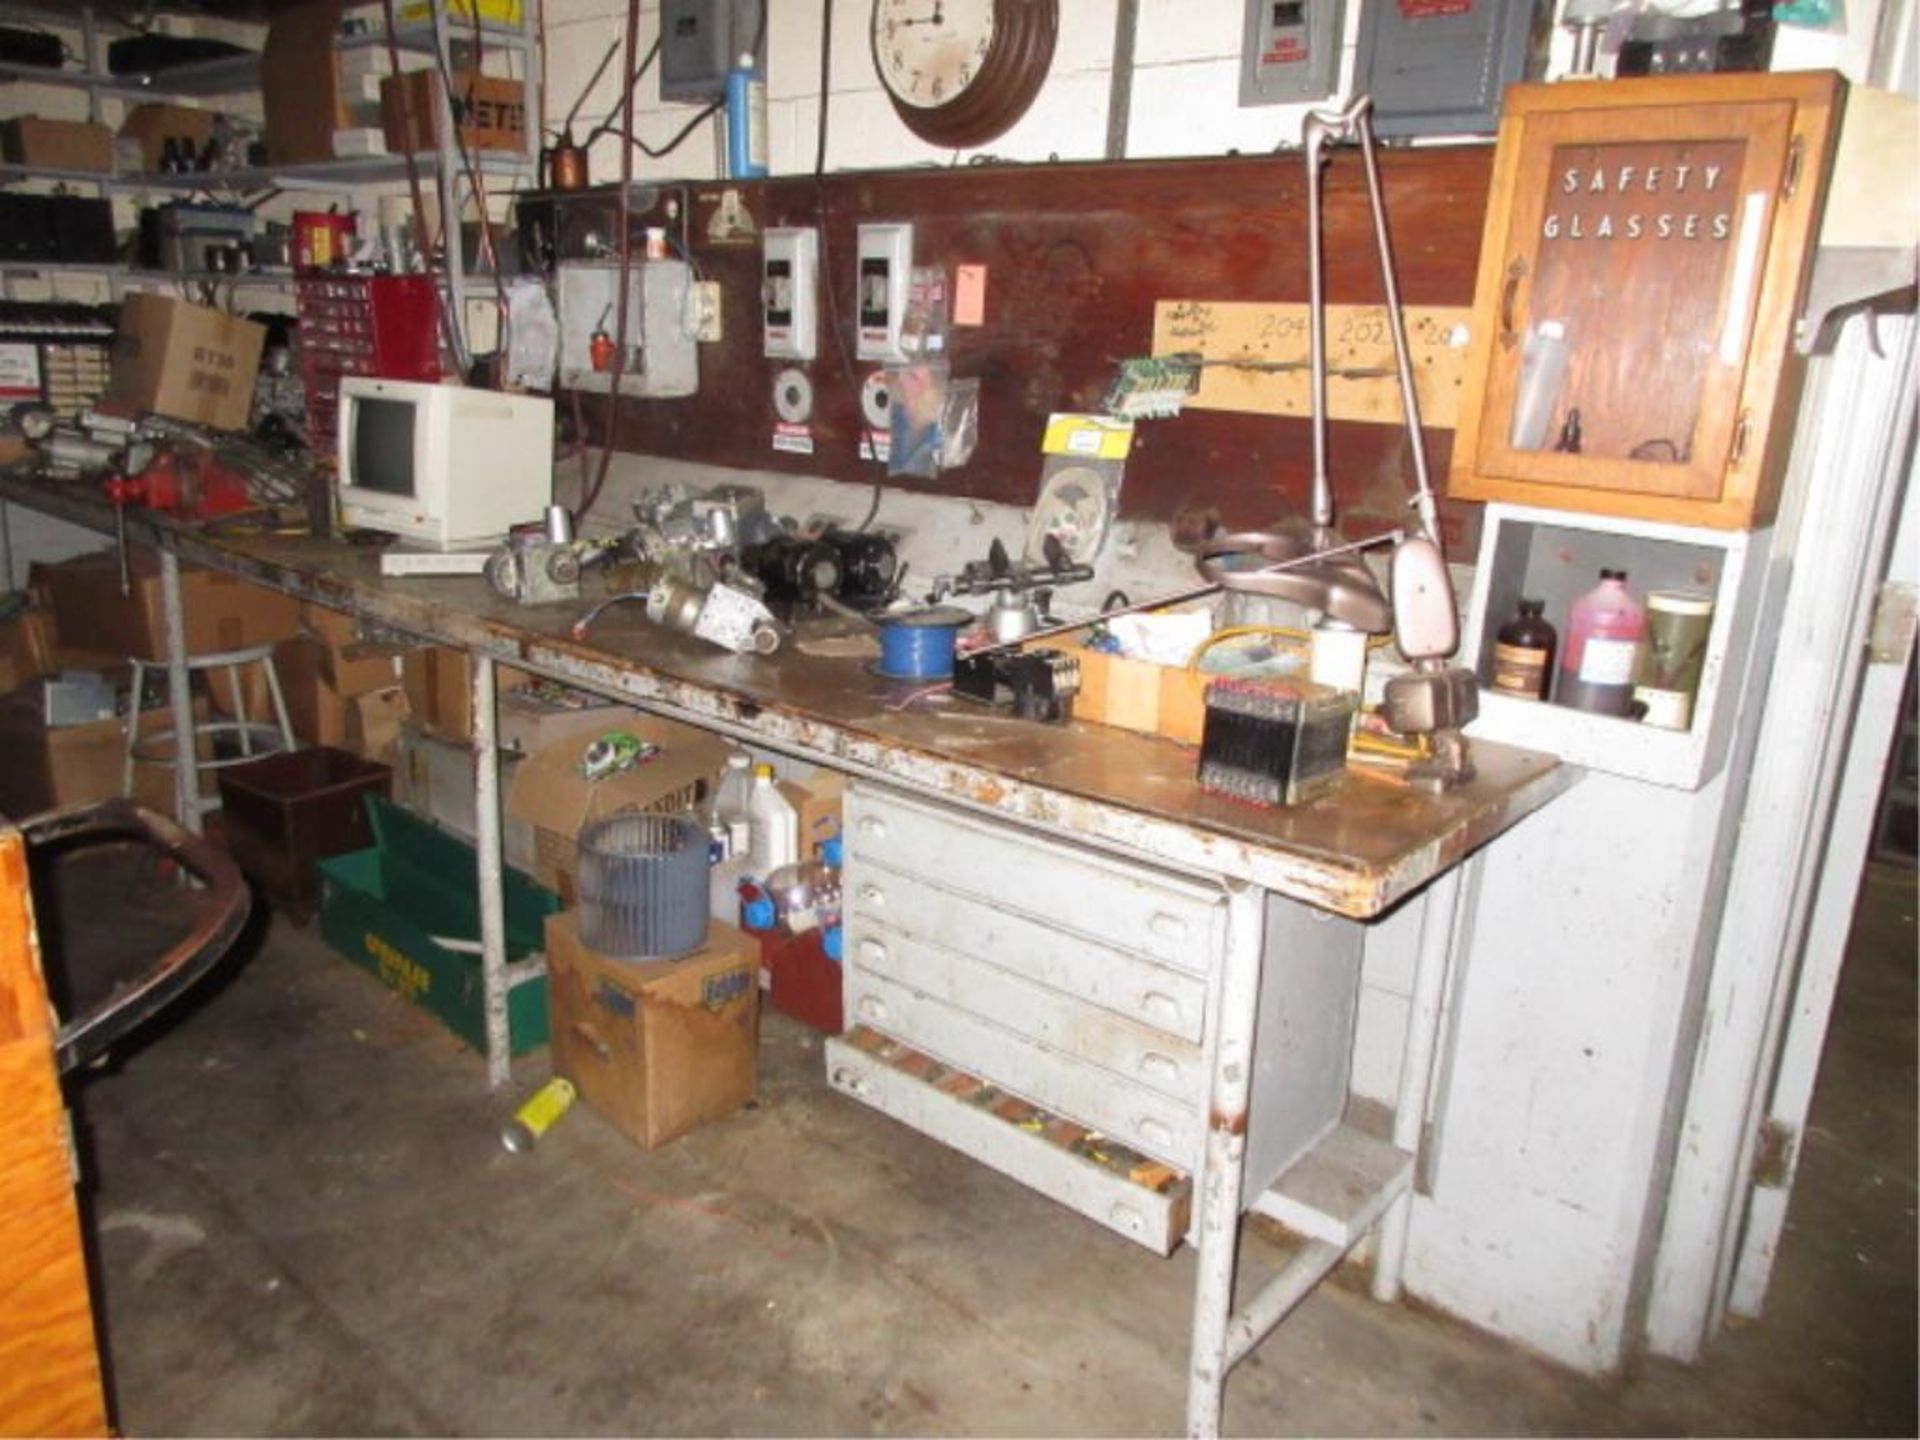 Lot Contents of Electrical Shop, includes cabinets, contents, conduit, etc. in three rooms. - Image 11 of 17